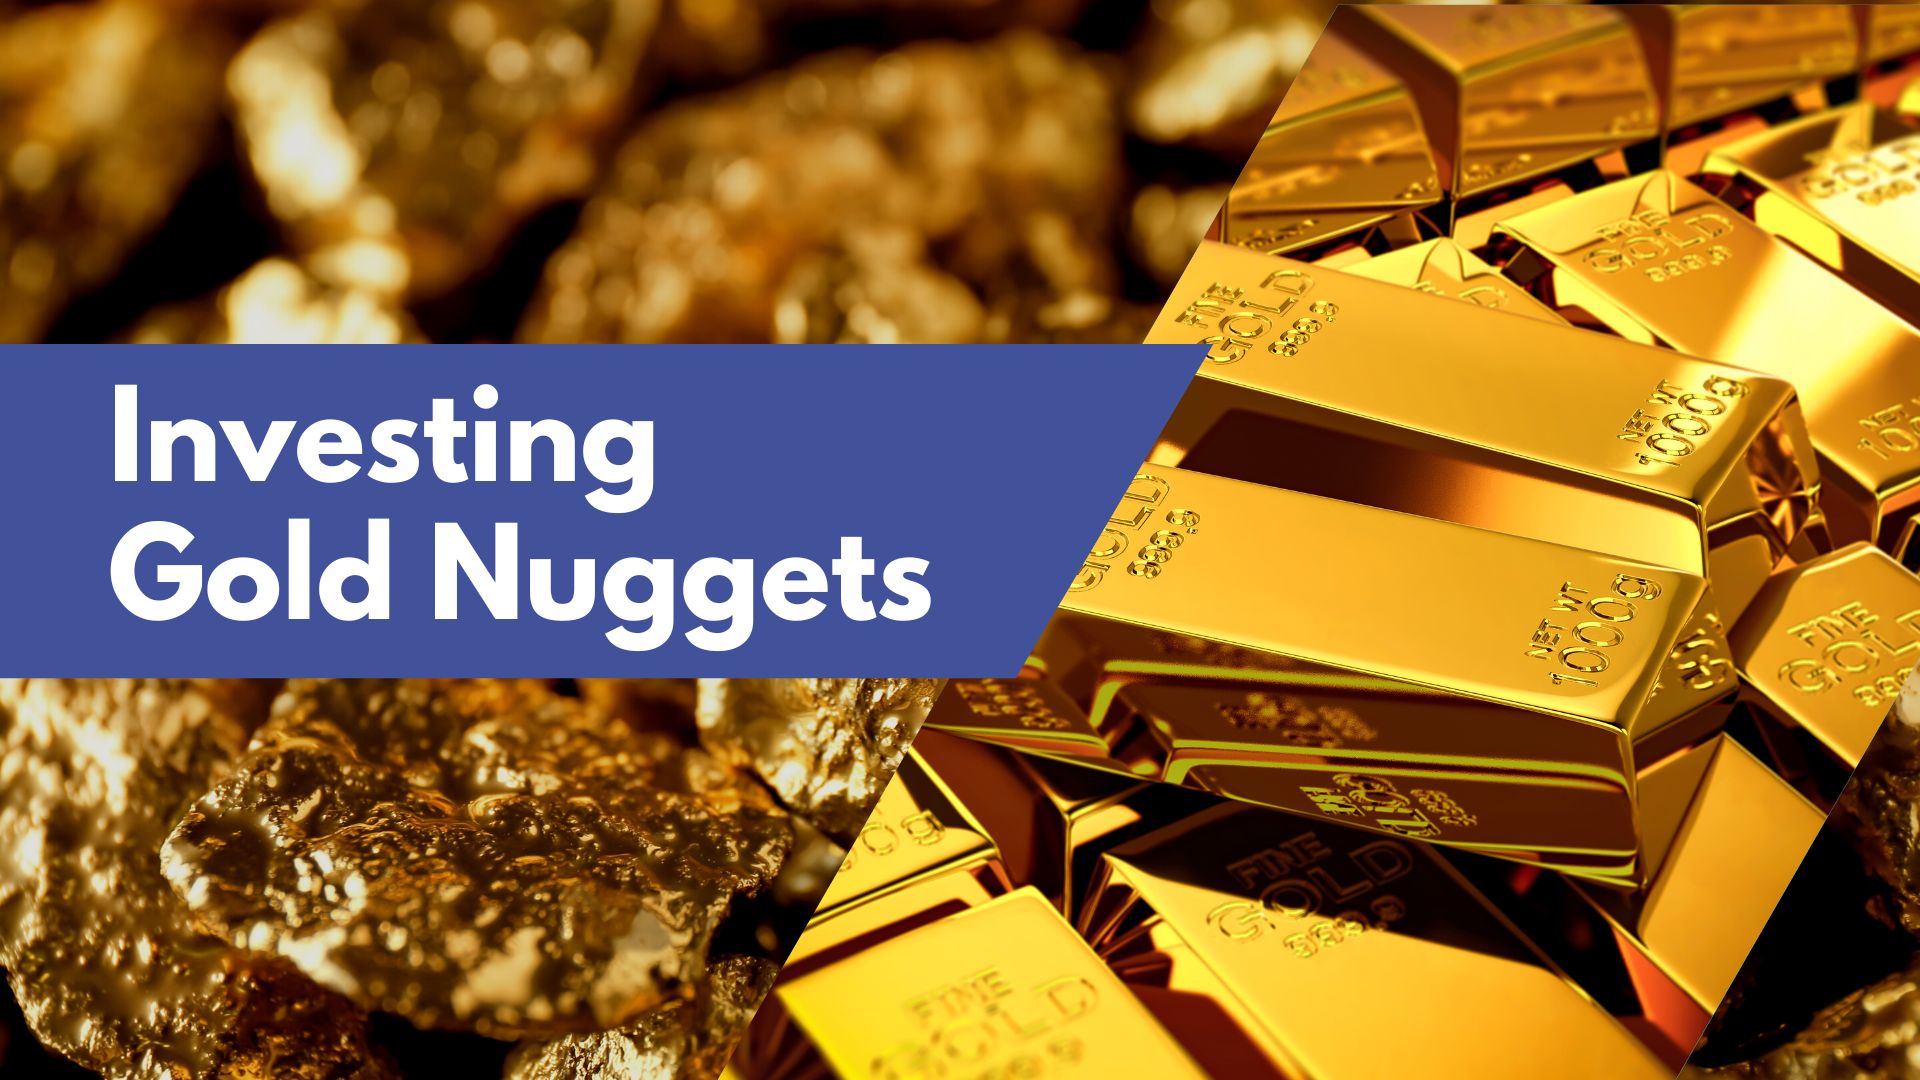 Investing in Gold Nuggets